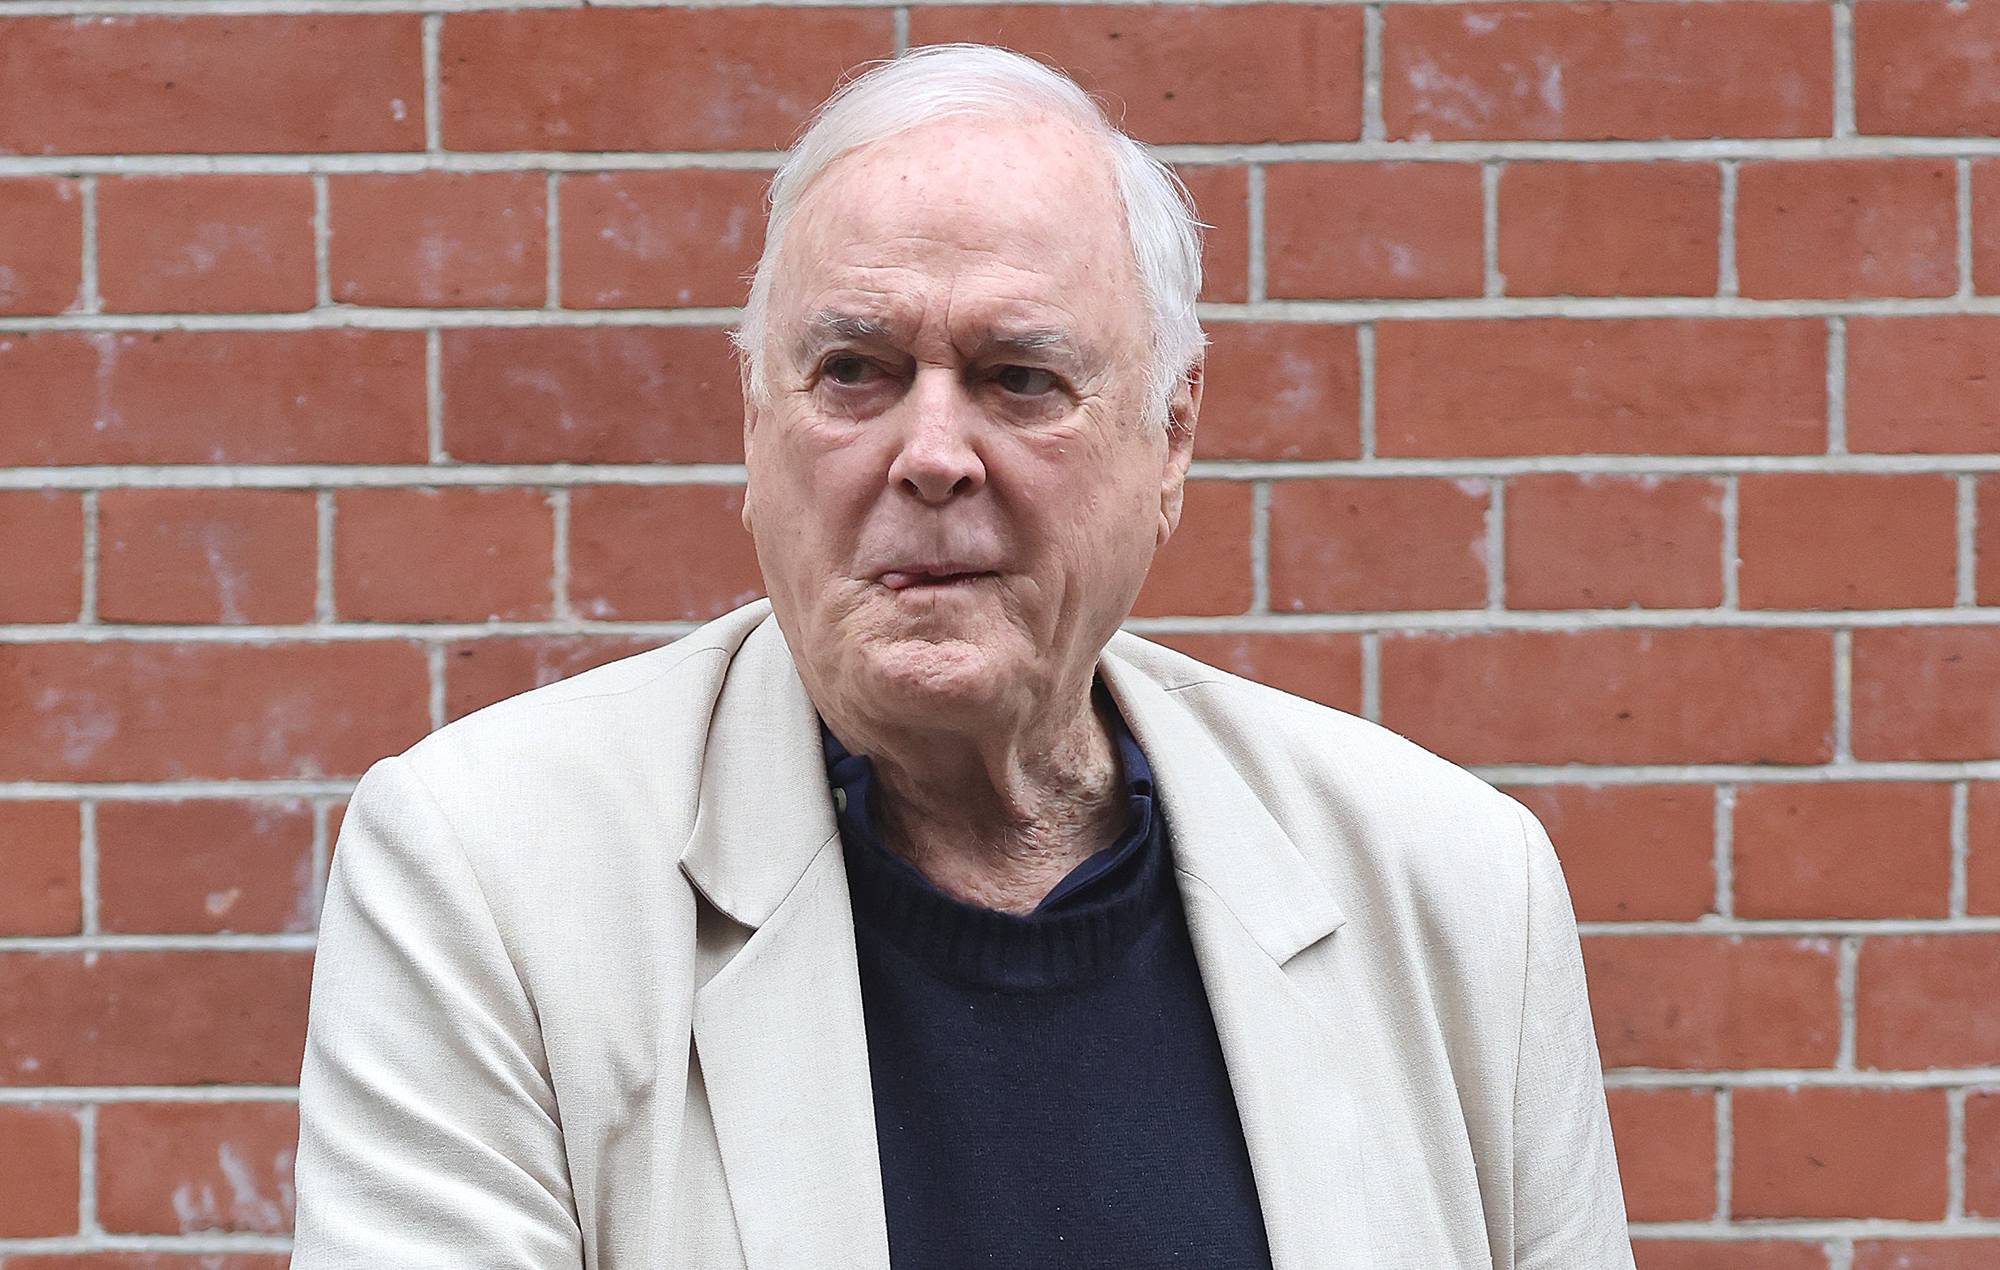 John Cleese will remove racial slurs from stage version of ‘Fawlty Towers’